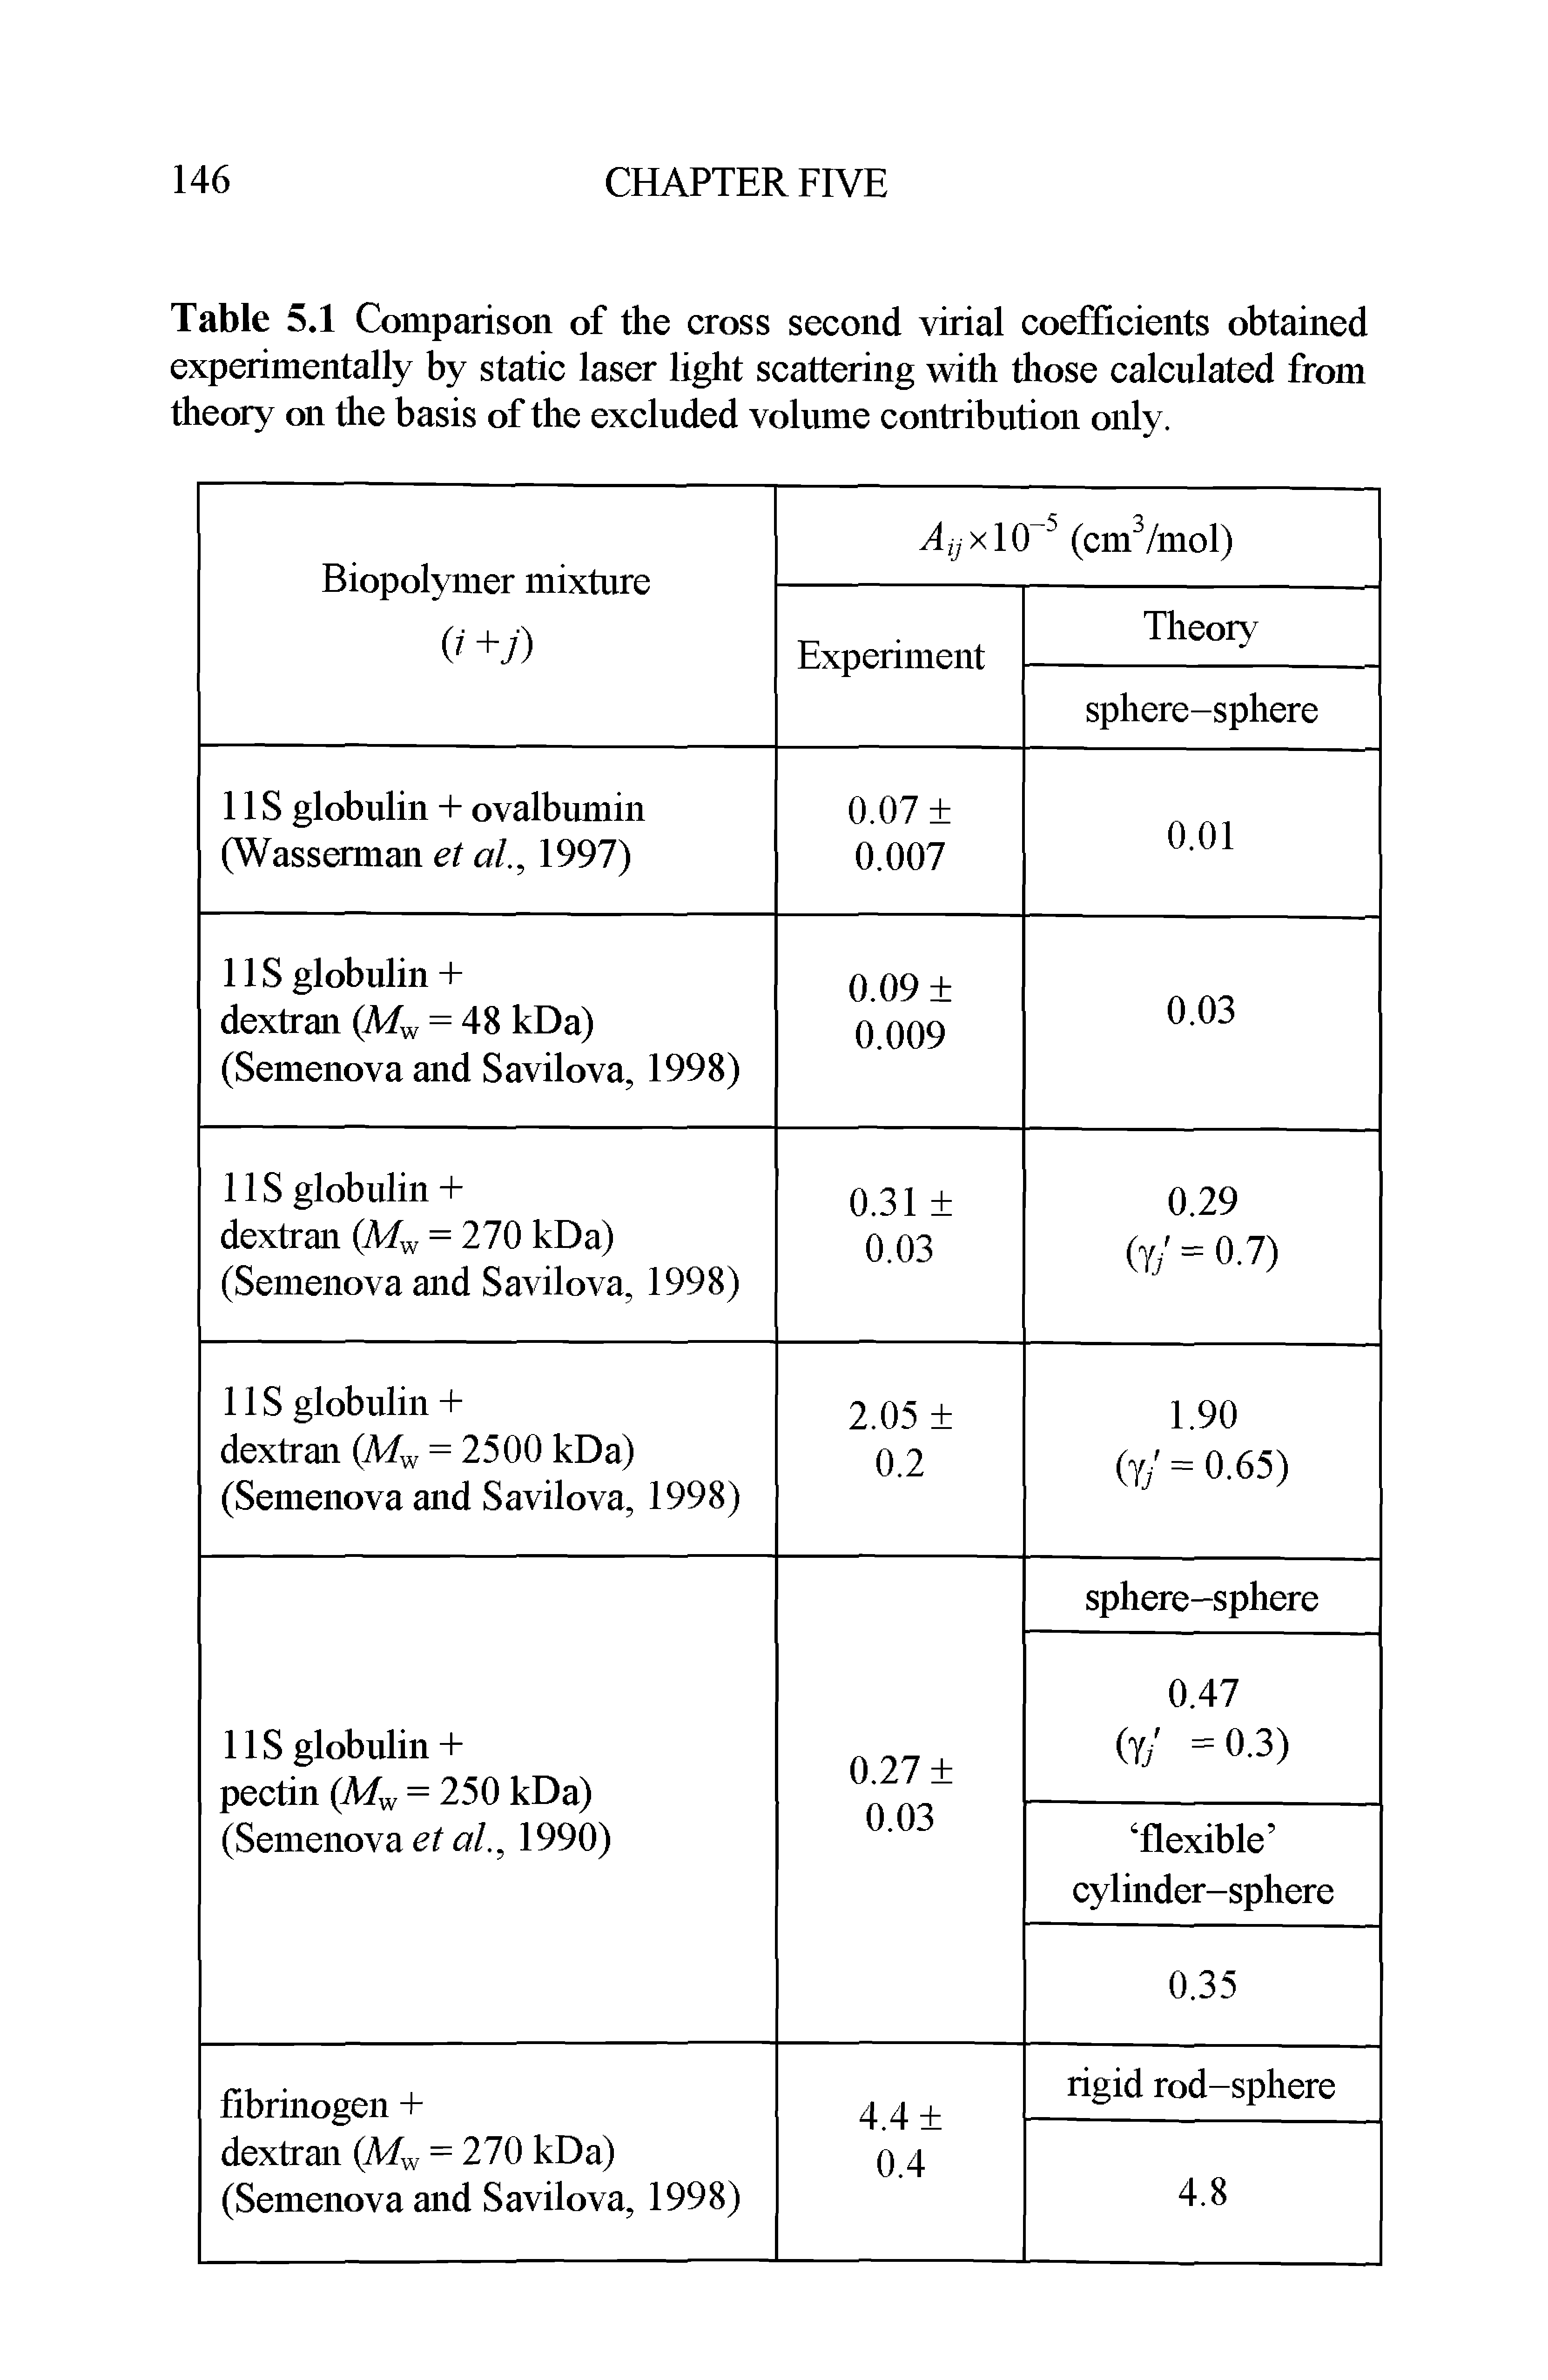 Table 5.1 Comparison of the cross second virial coefficients obtained experimentally by static laser light scattering with those calculated from theory on the basis of the excluded volume contribution only.